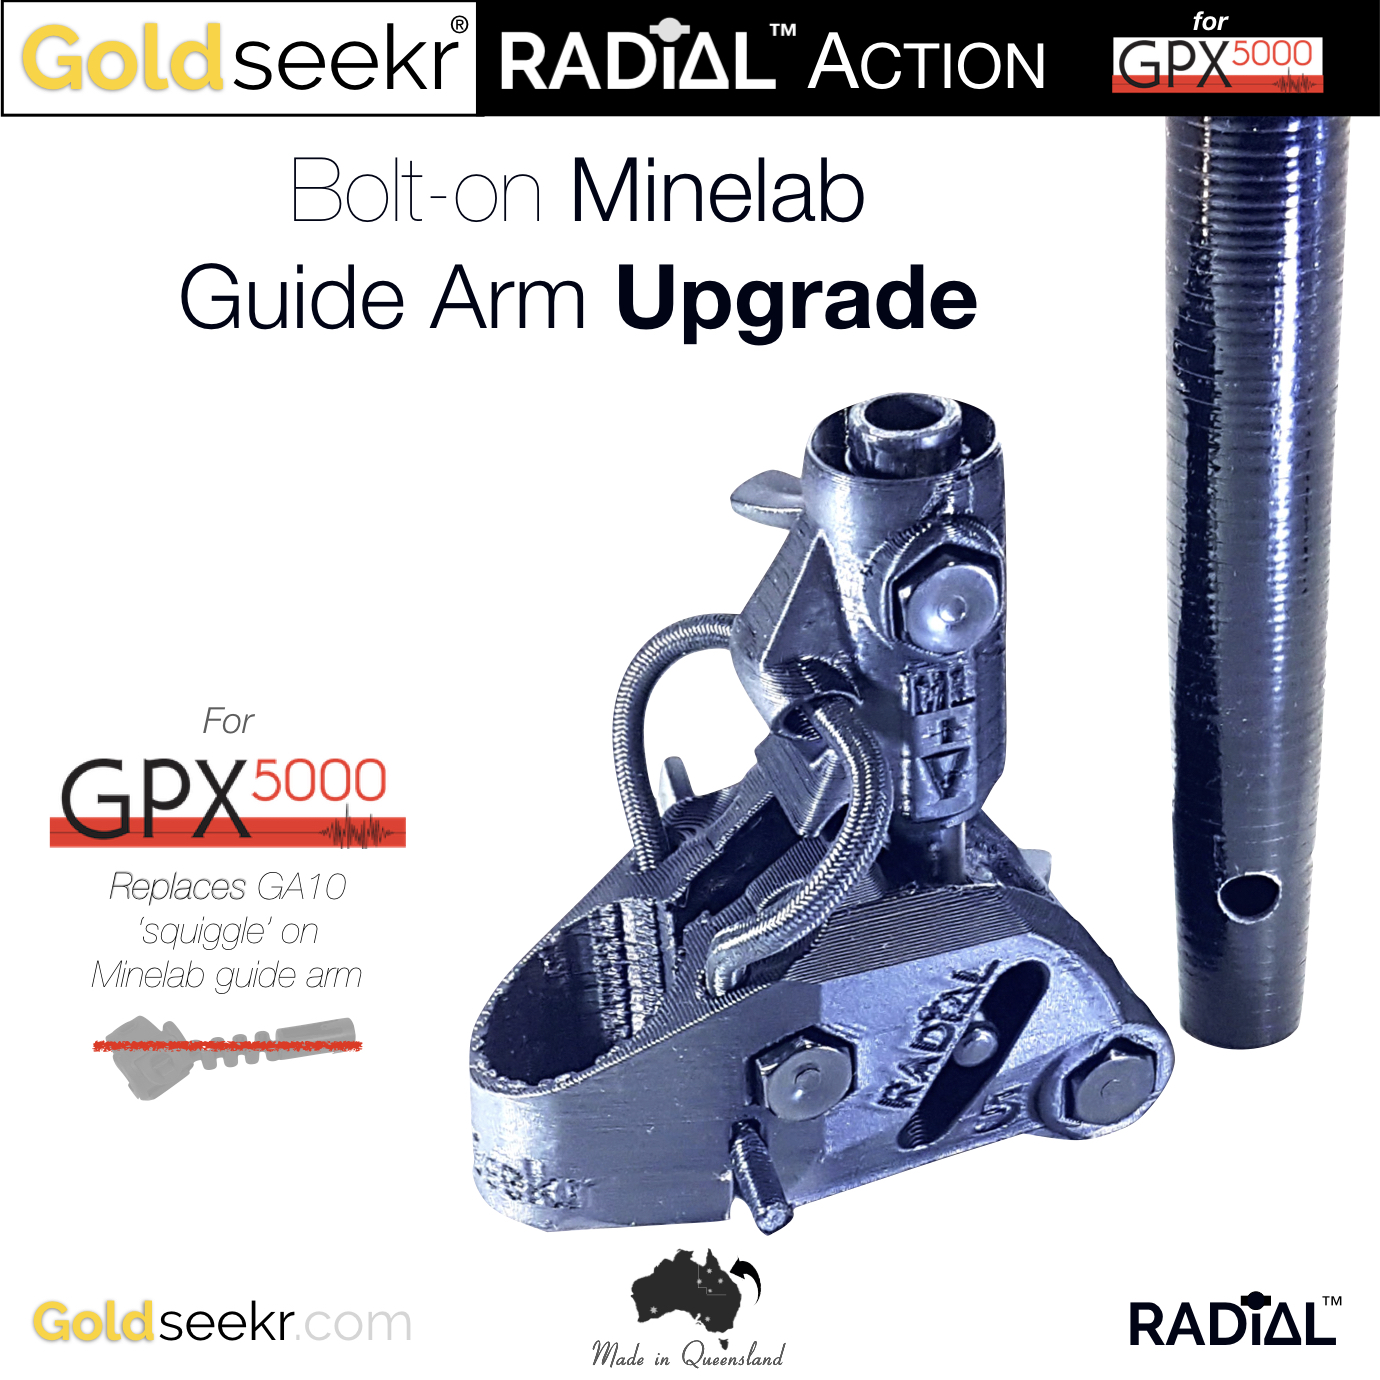 Goldseekr-RADiAL-Action-Minelab-Guide-Arm-GA-10-Bolt-on-SQUIGGLE-Accessory-hinge-UpGrade-for-Minelab-GPX5000